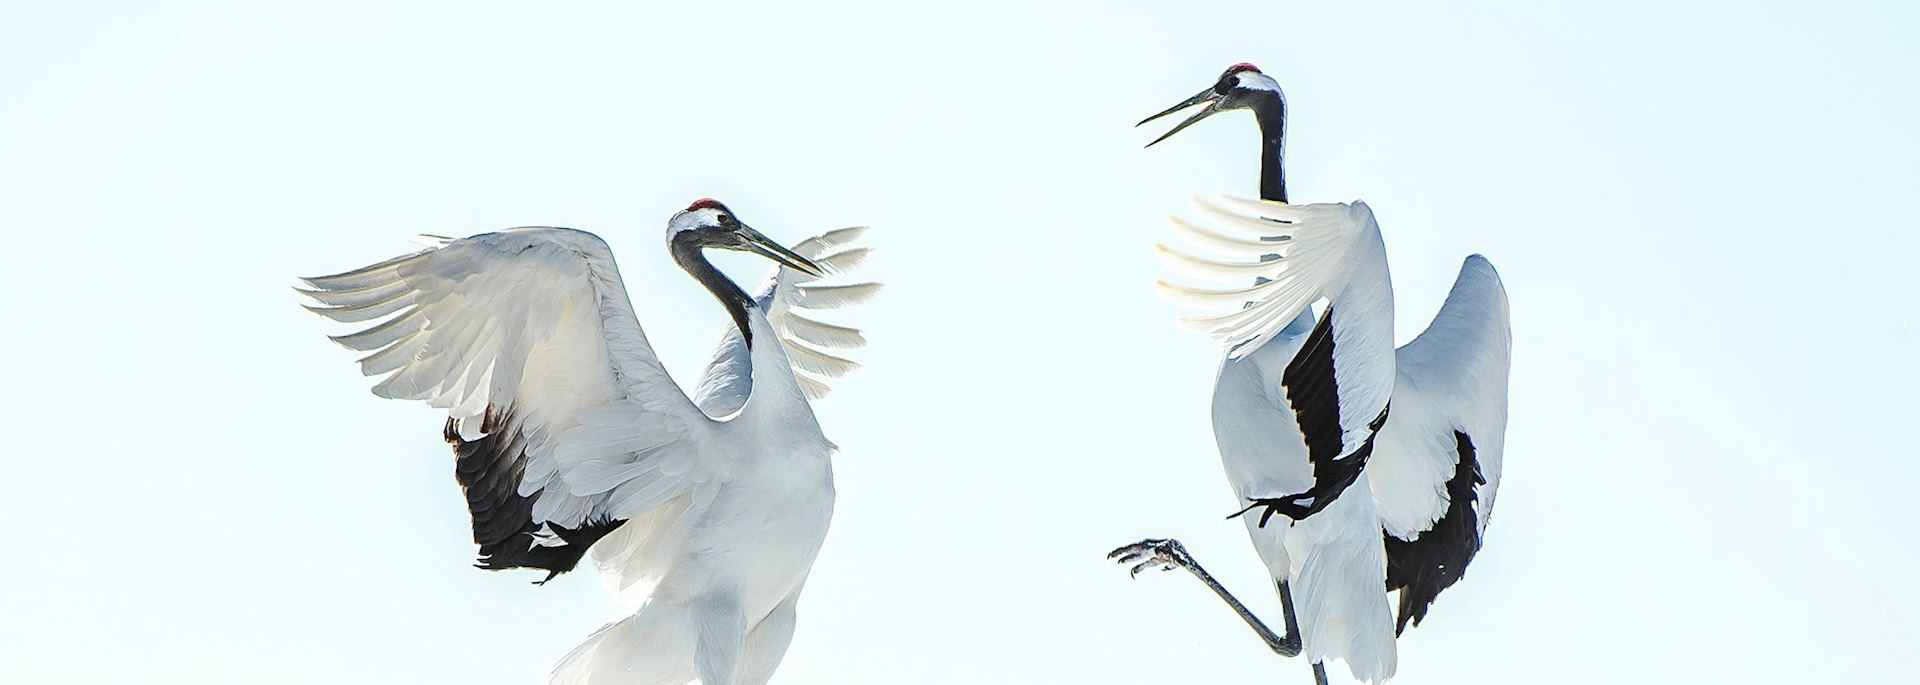 Red-crested crane mating ritual